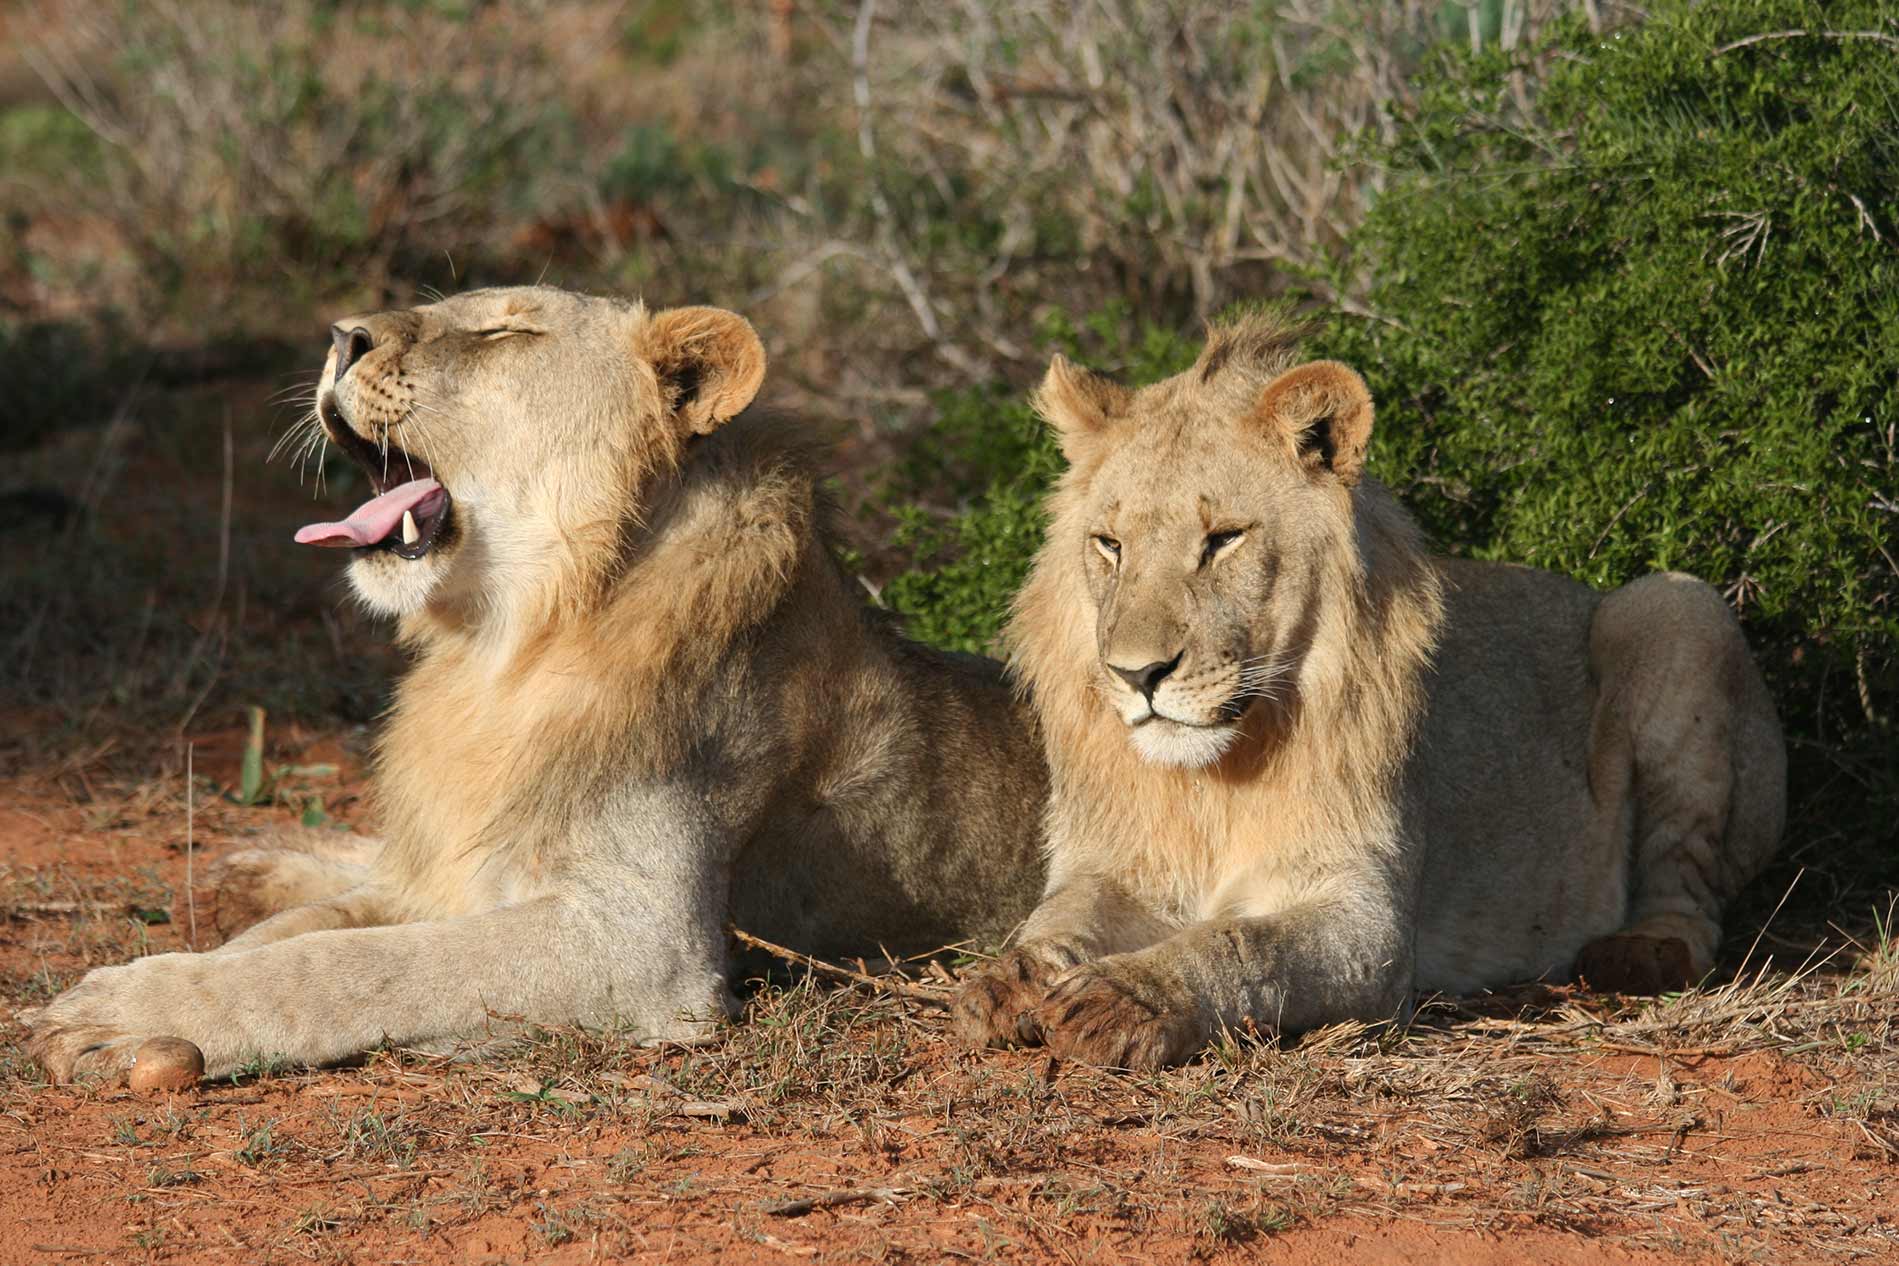 Lions in Moremi Game Reserve